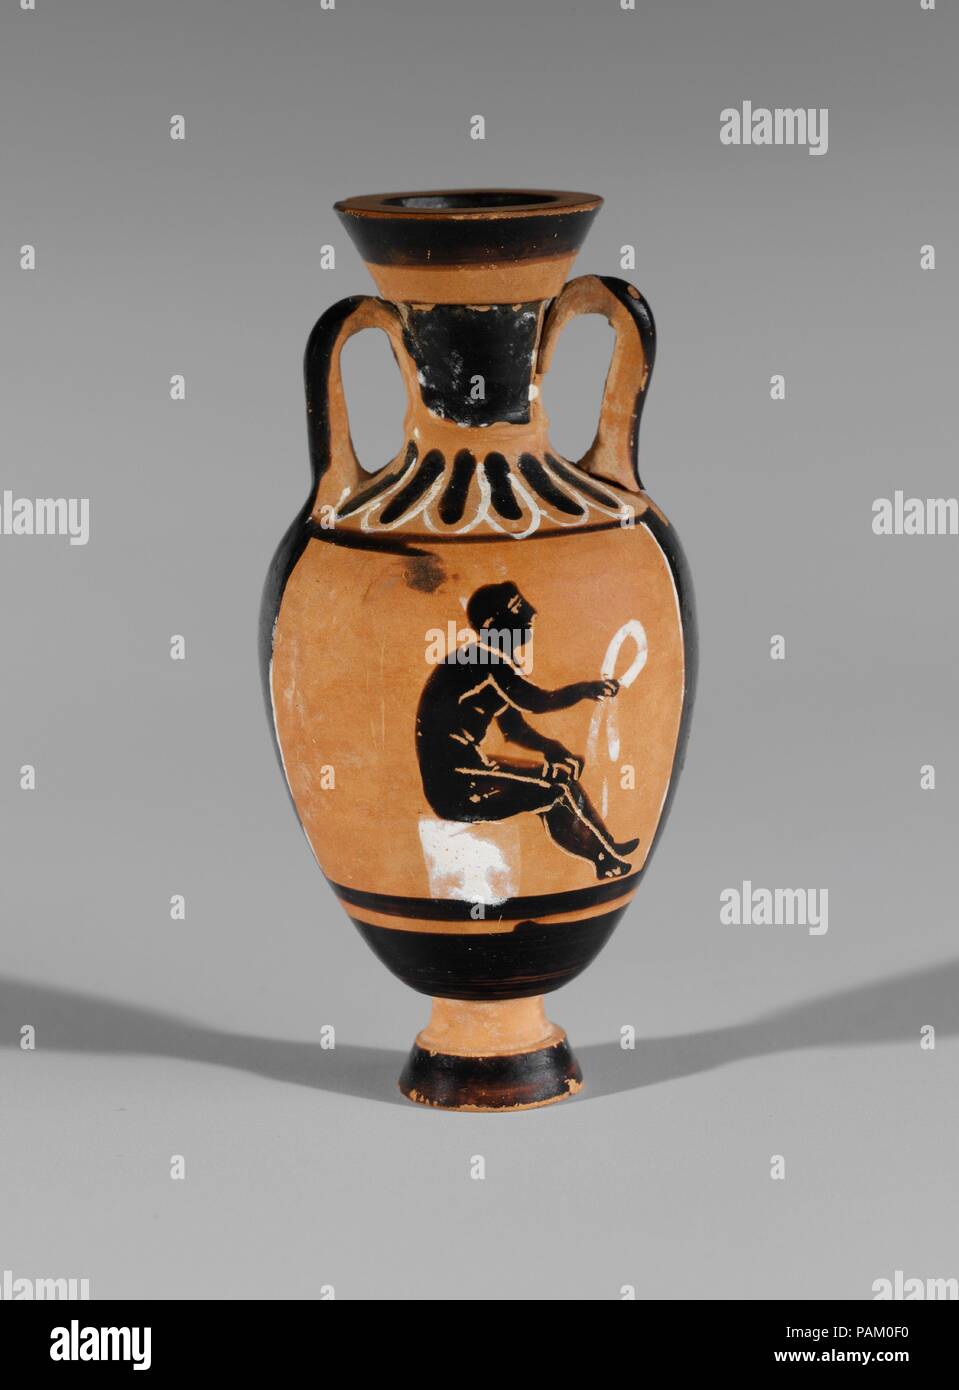 Terracotta miniature Panathenaic amphora. Culture: Greek, Attic. Dimensions: H.: 3 5/16 in. (8.4 cm). Date: ca. 400 B.C..  Obverse, Athena   Reverse, seated athlete  The Bulas Group specialized in miniature versions of Panathenaic prize amphorae. The shape and the representation of Athena follow the models quite closely. The seated athlete holding what might be a fillet is a narrative vignette that would not have appeared on a prize vase. Museum: Metropolitan Museum of Art, New York, USA. Stock Photo